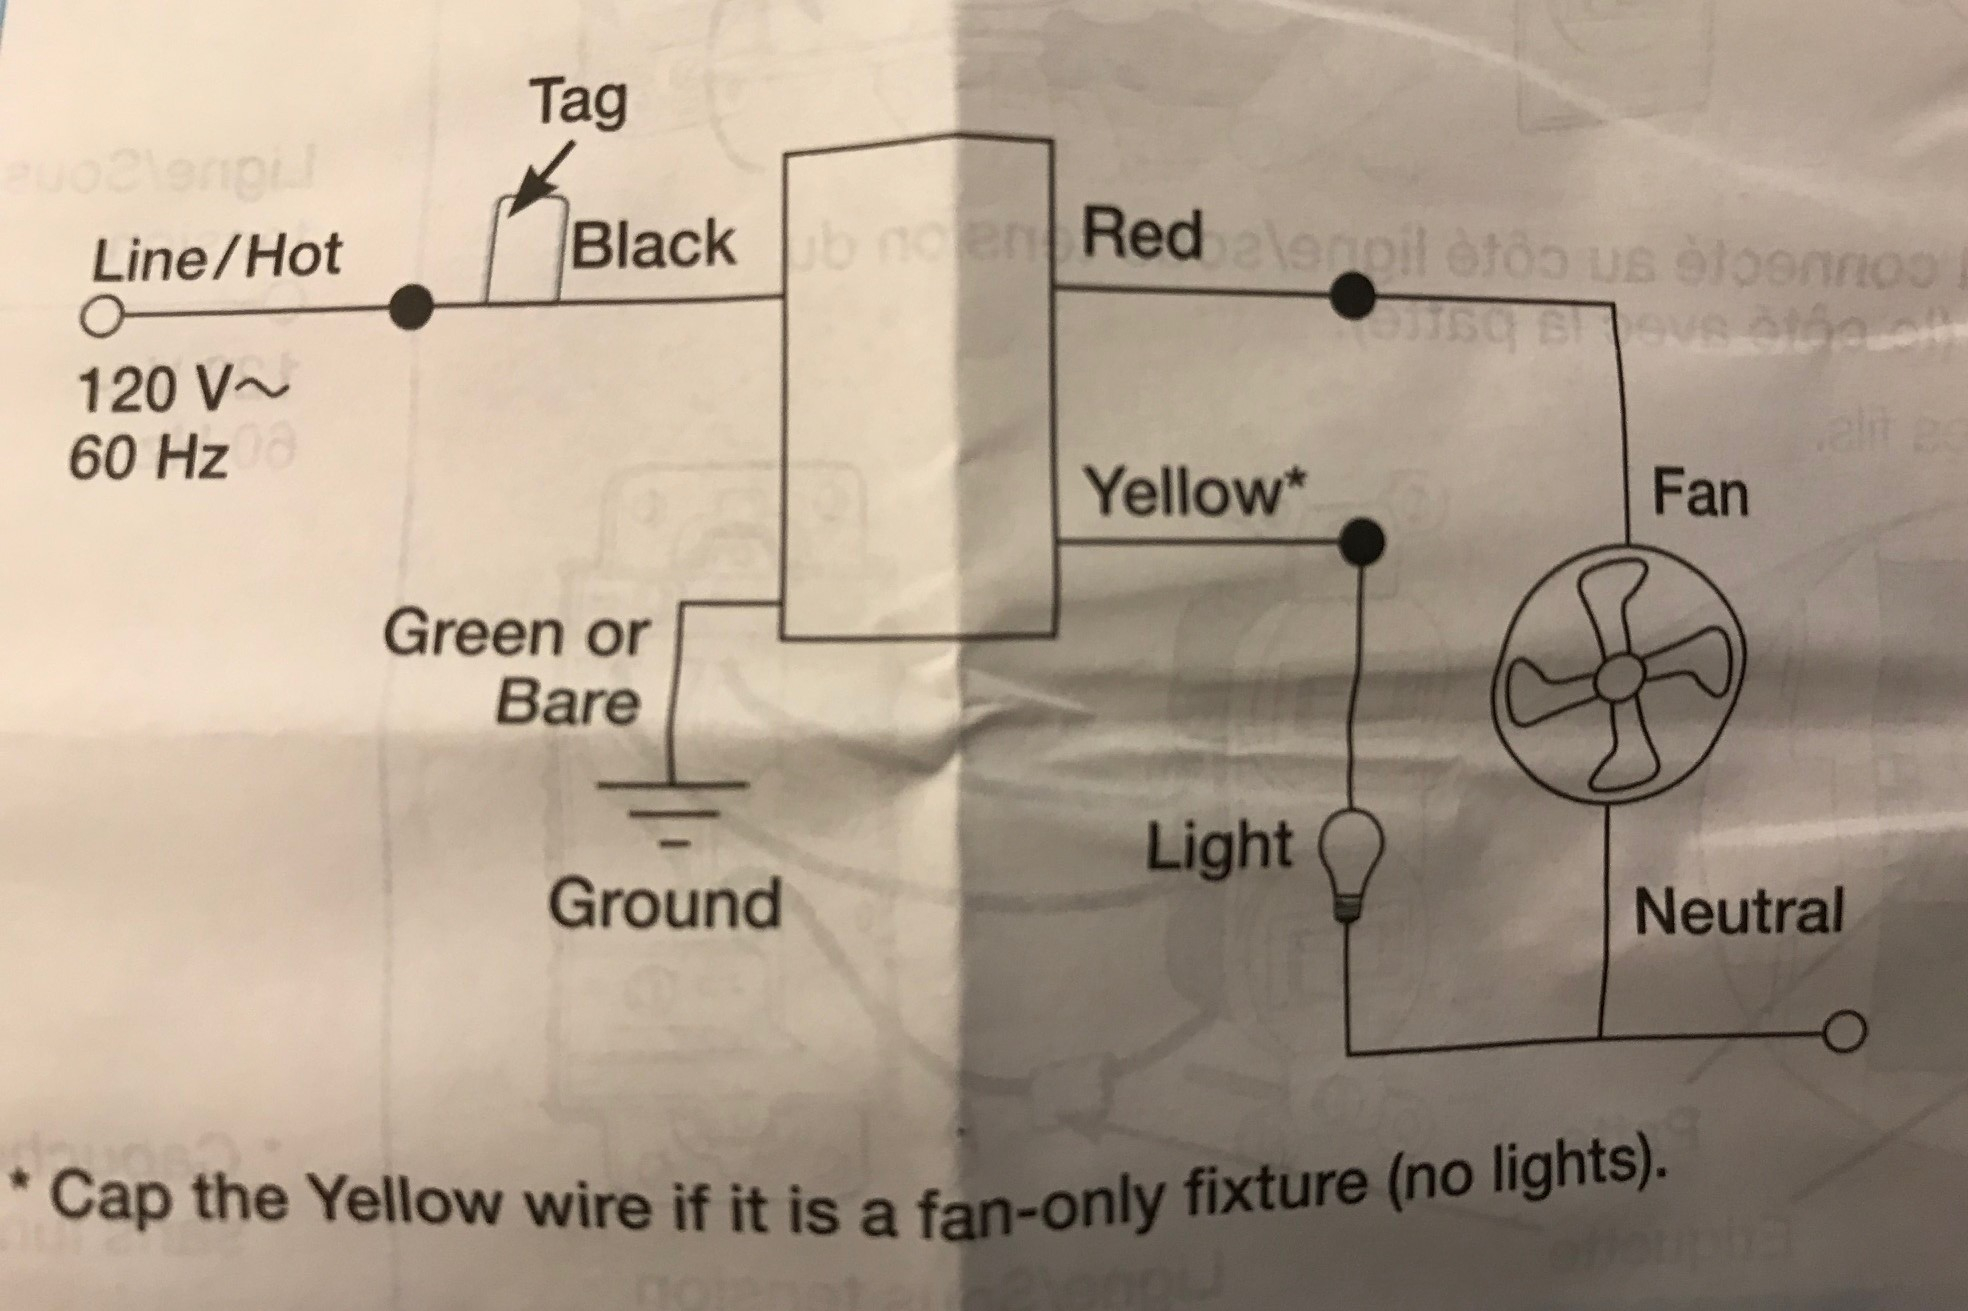 Ceiling Fandimmer Wiring Home Improvement Stack Exchange within dimensions 1968 X 1311